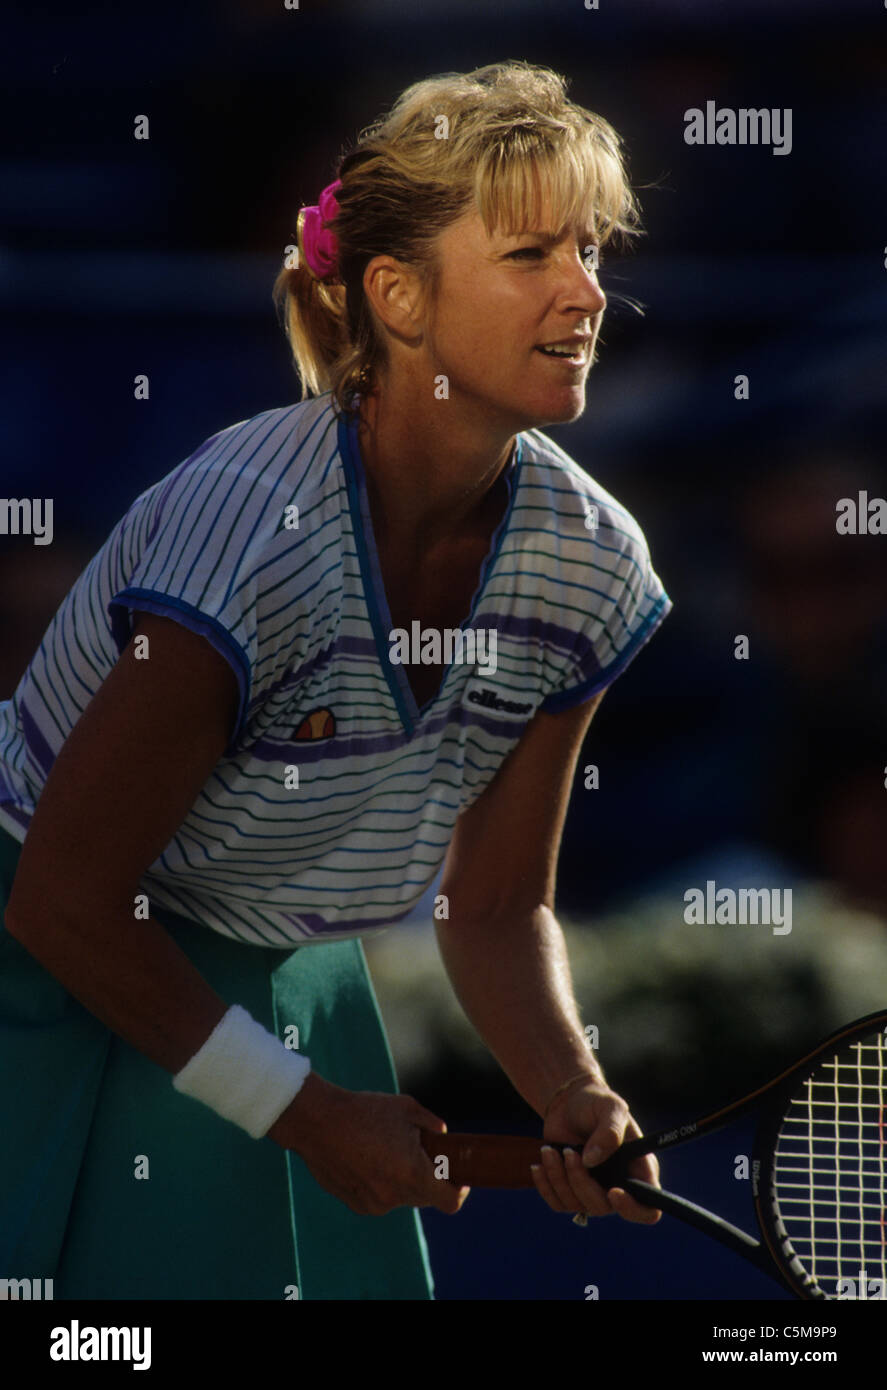 Chris Evert (USA) at the 1989 US Open Tennis Championships Stock Photo